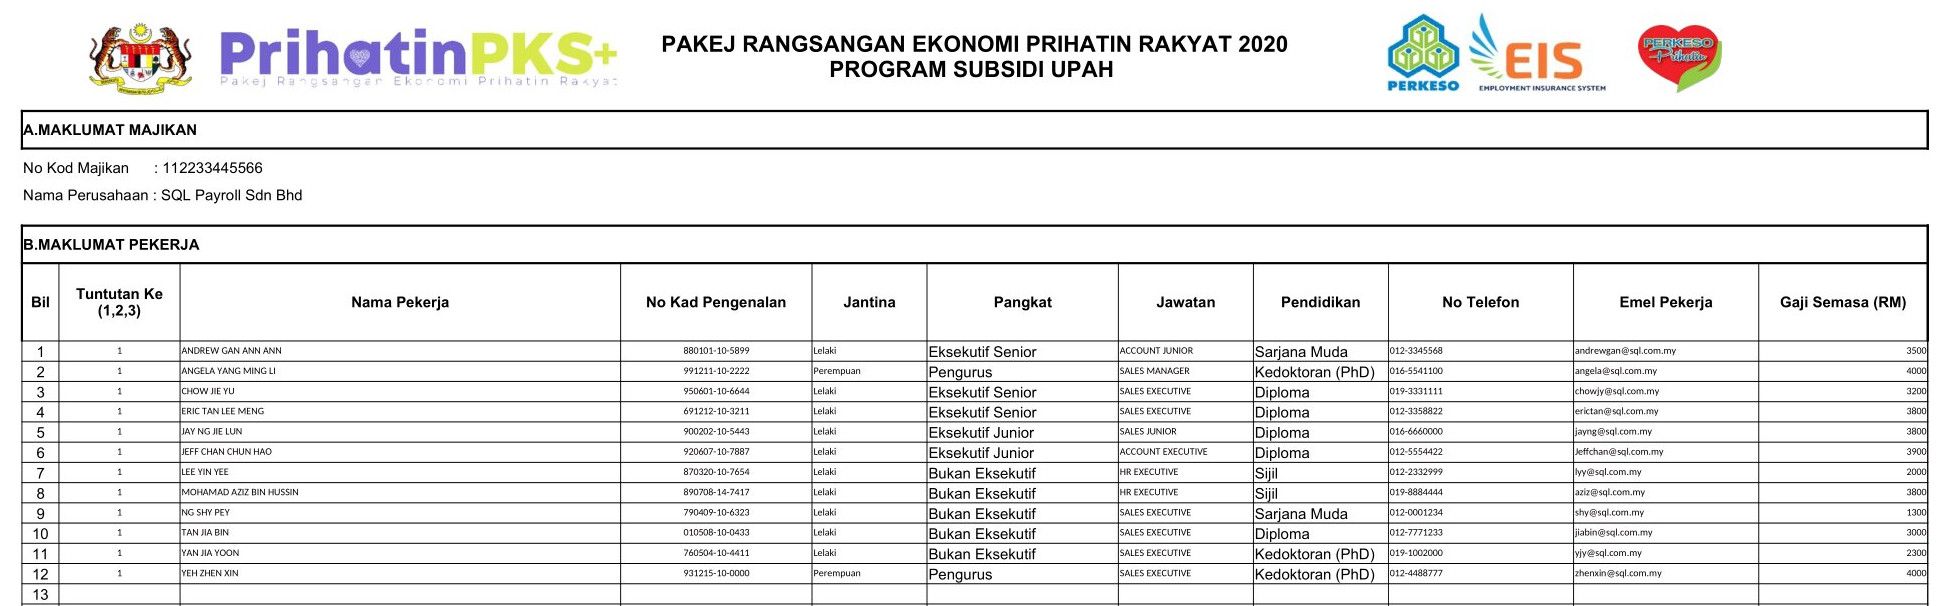 Wage subsidy programme 4.0 application